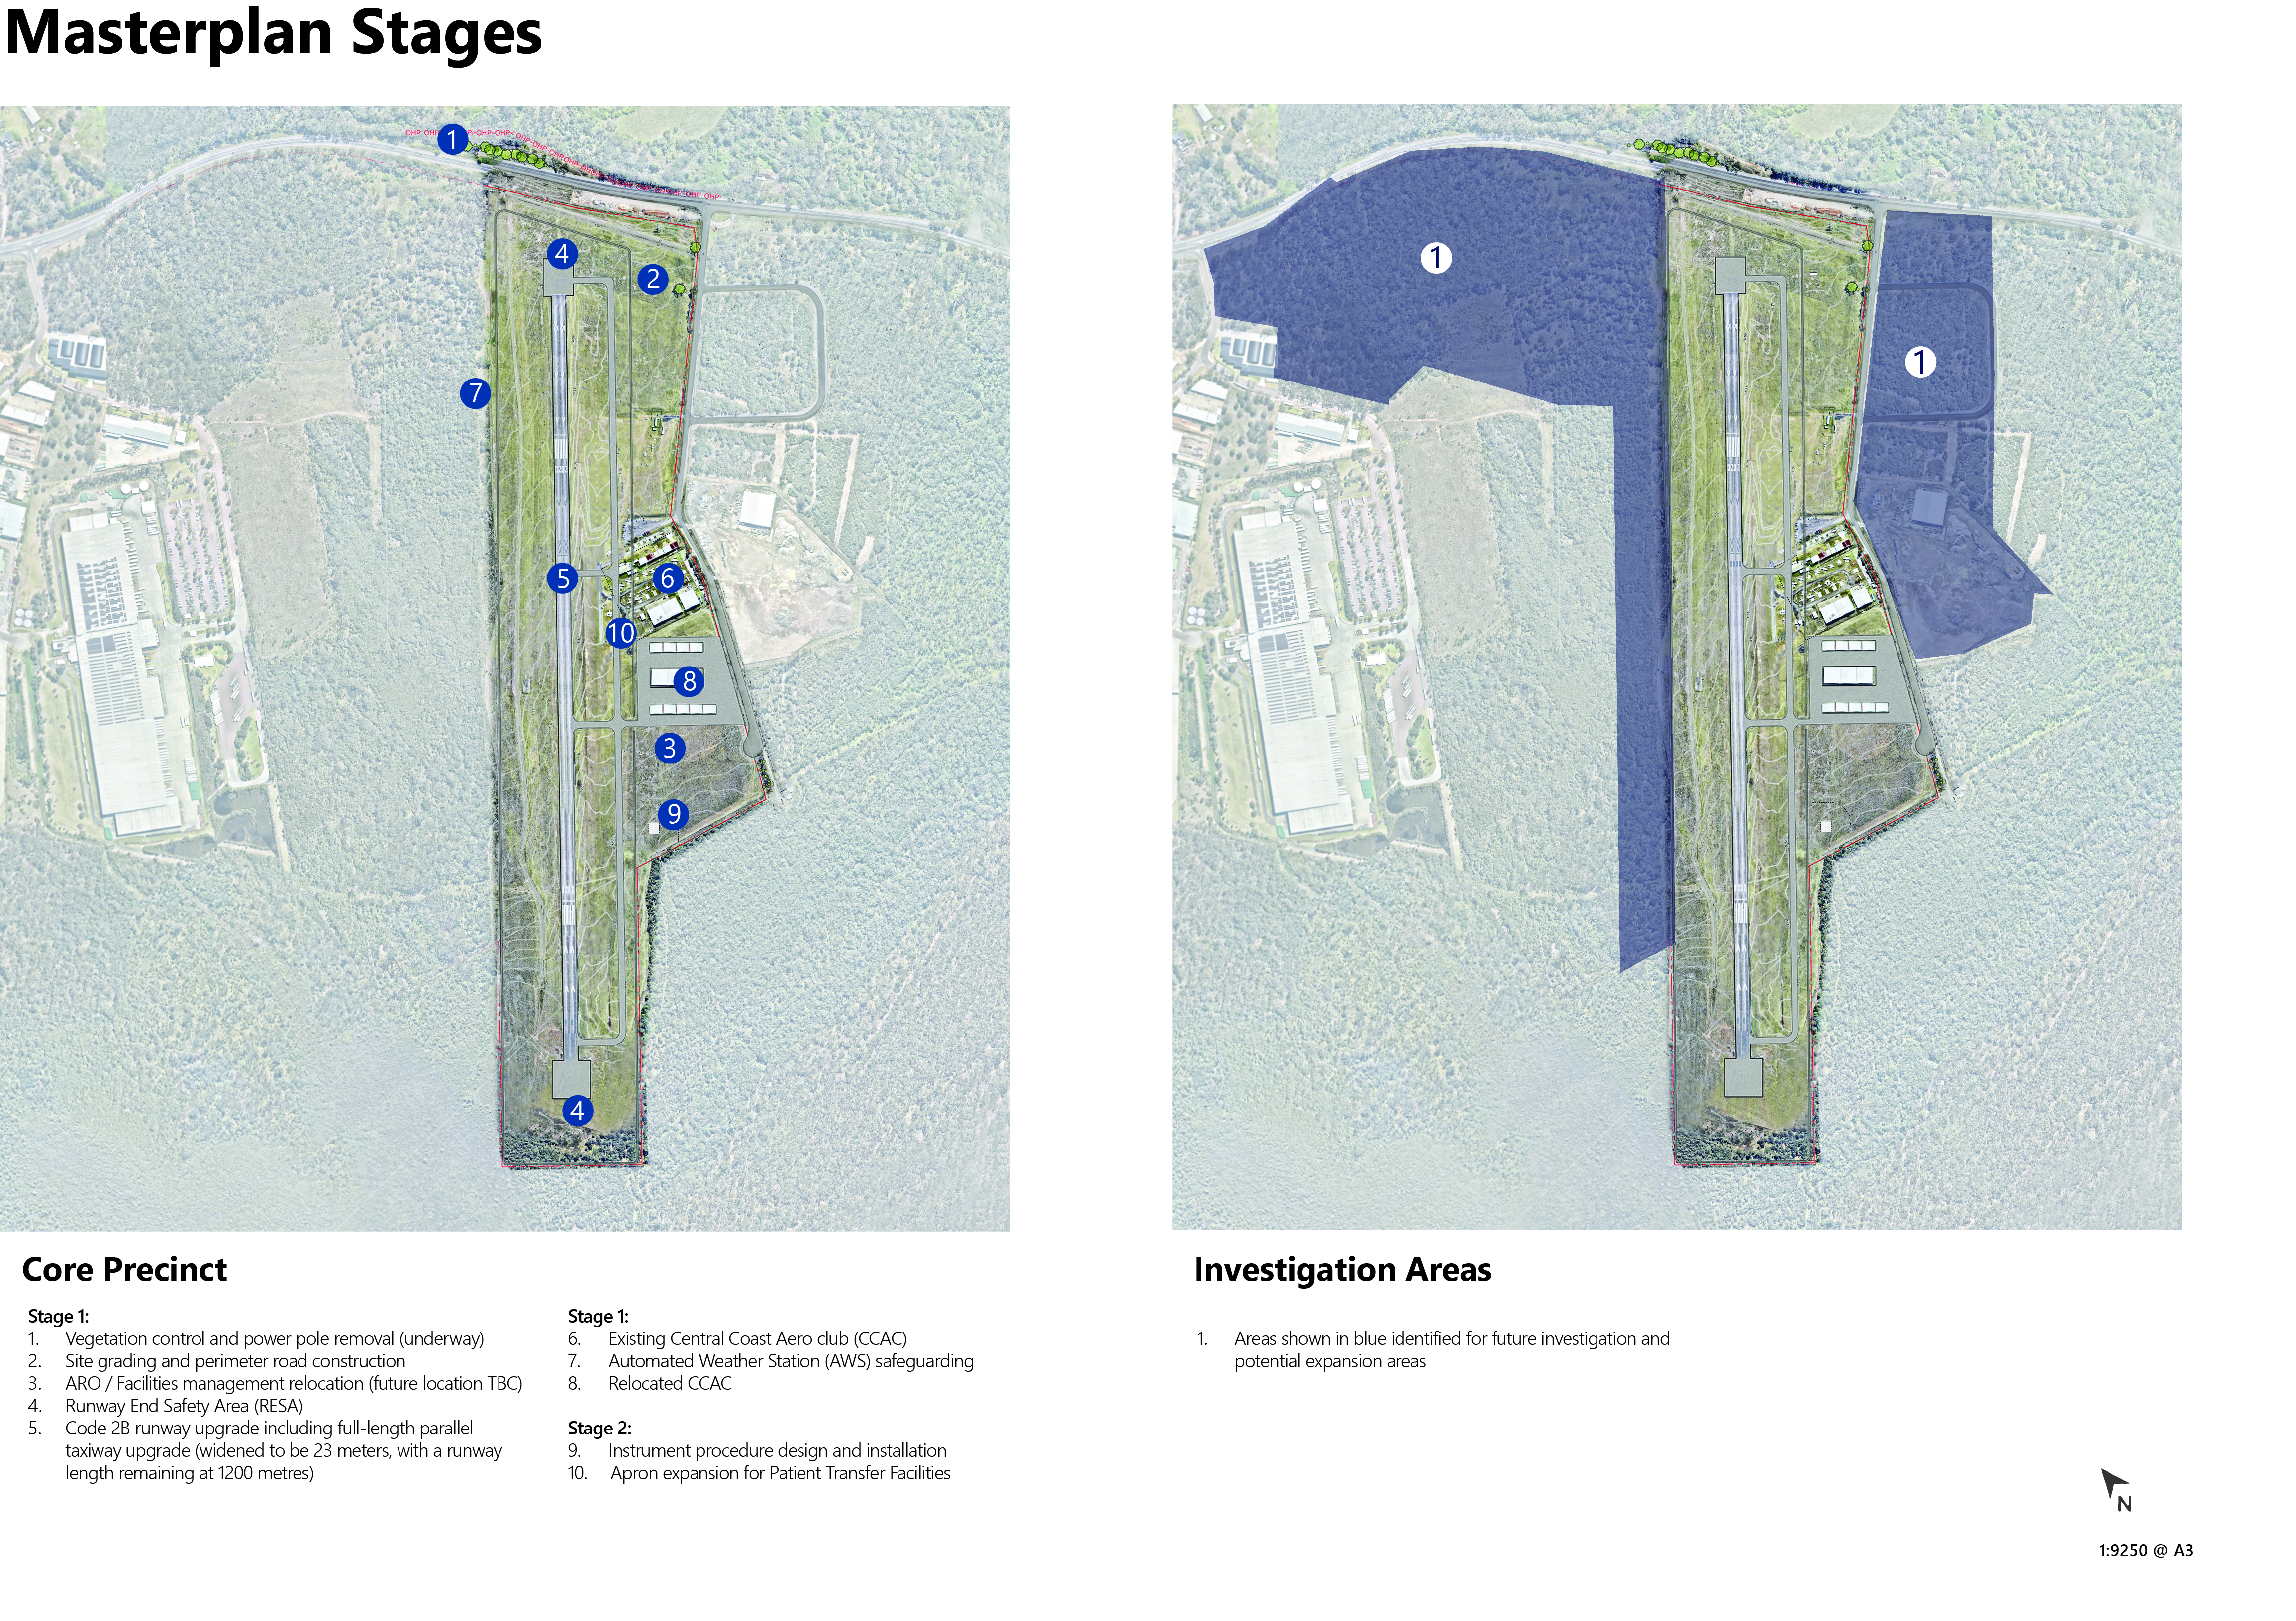 Airport Masterplan Stages